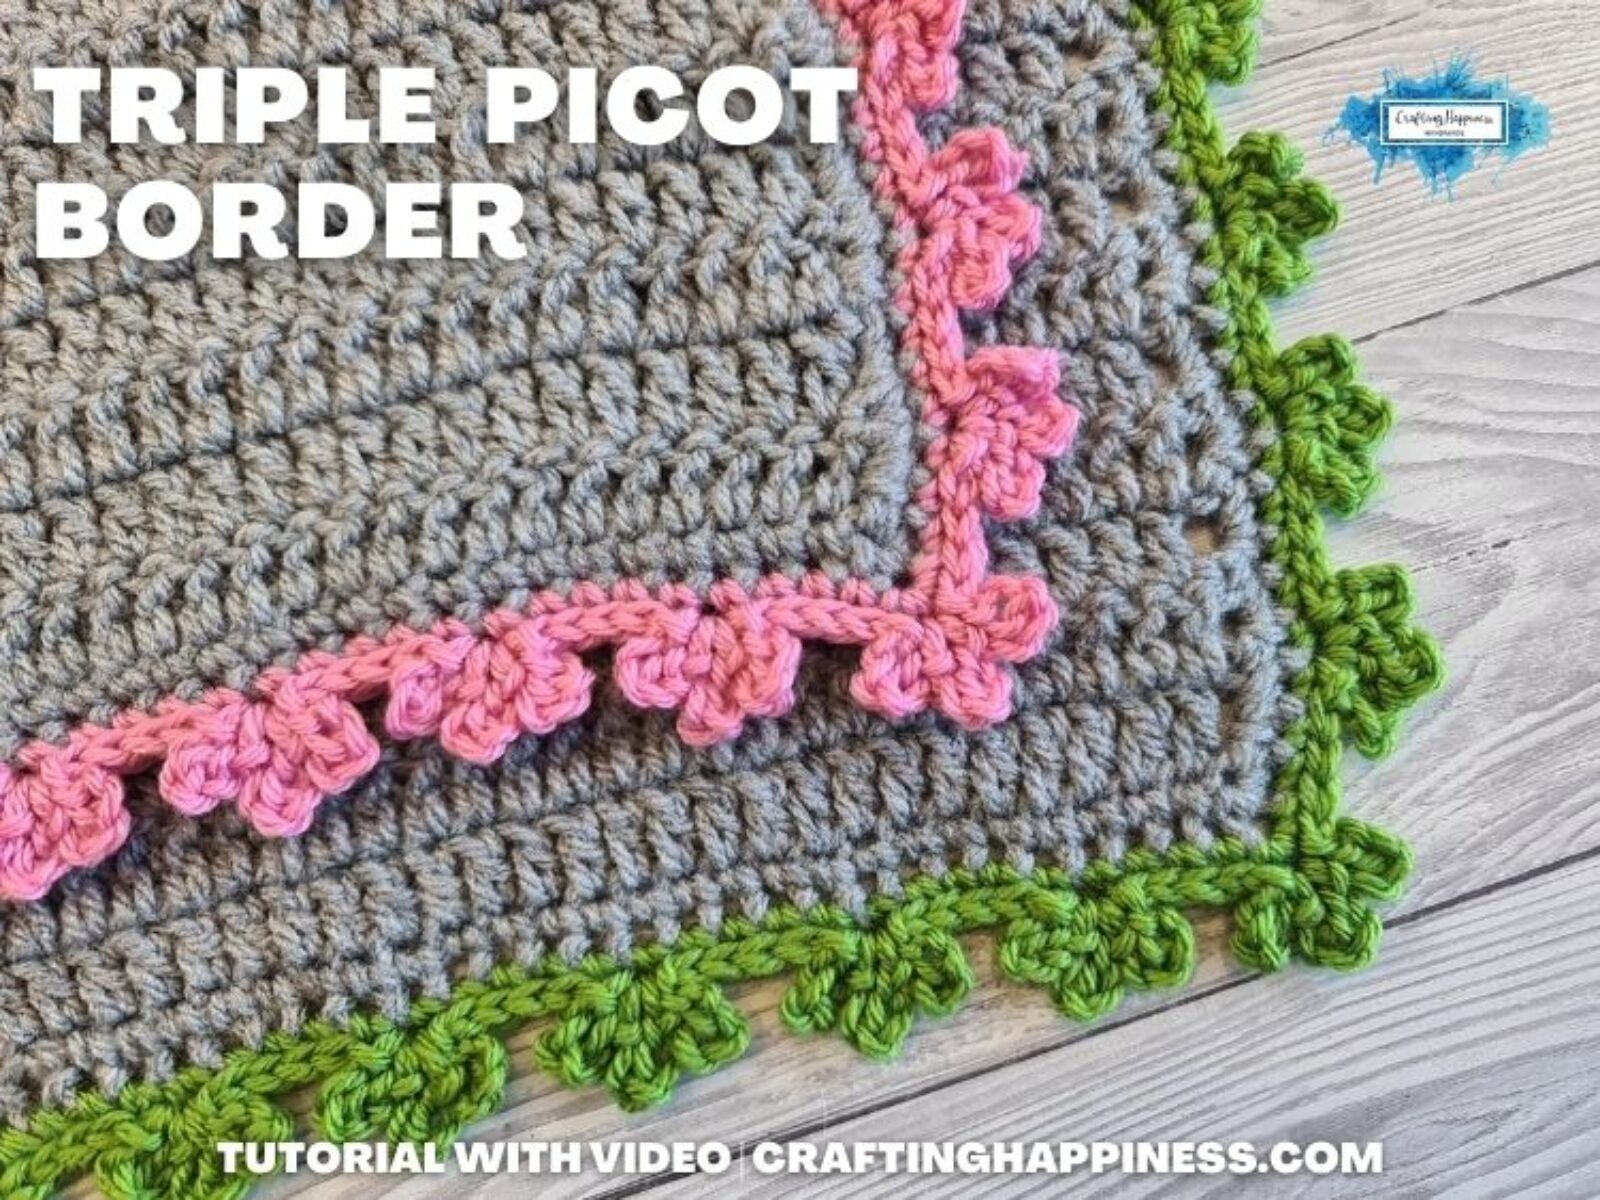 FB BLOG POSTER - Triple Picot Blanket Border Crafting Happiness